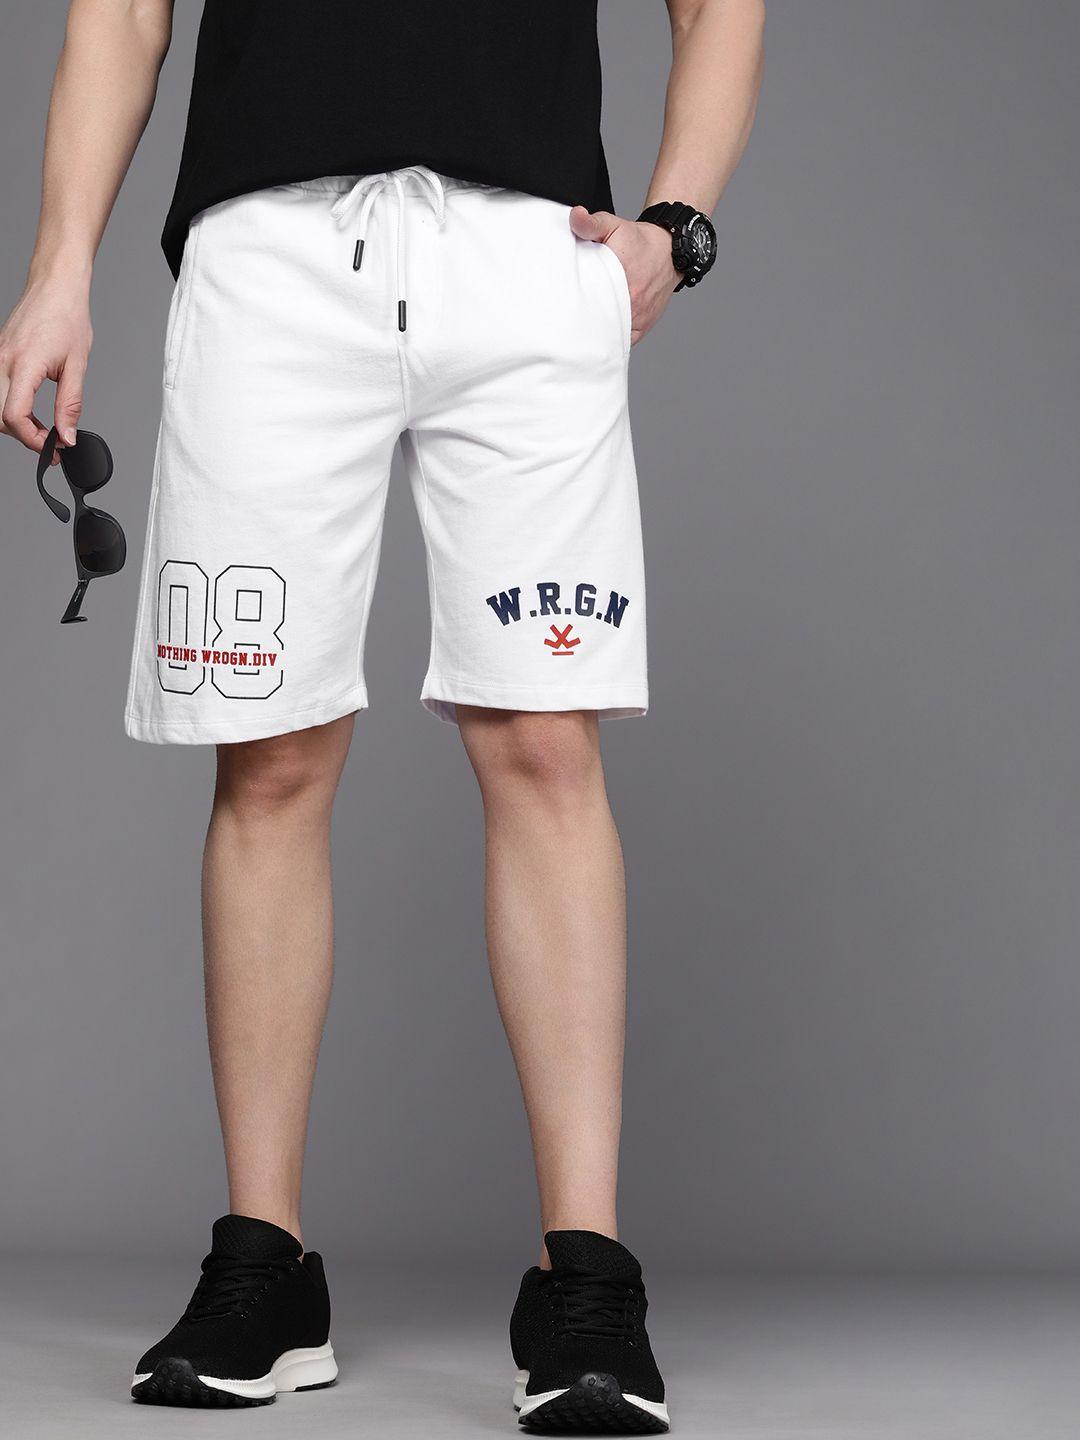 wrogn-men-typography-printed-mid-rise-above-knee-shorts